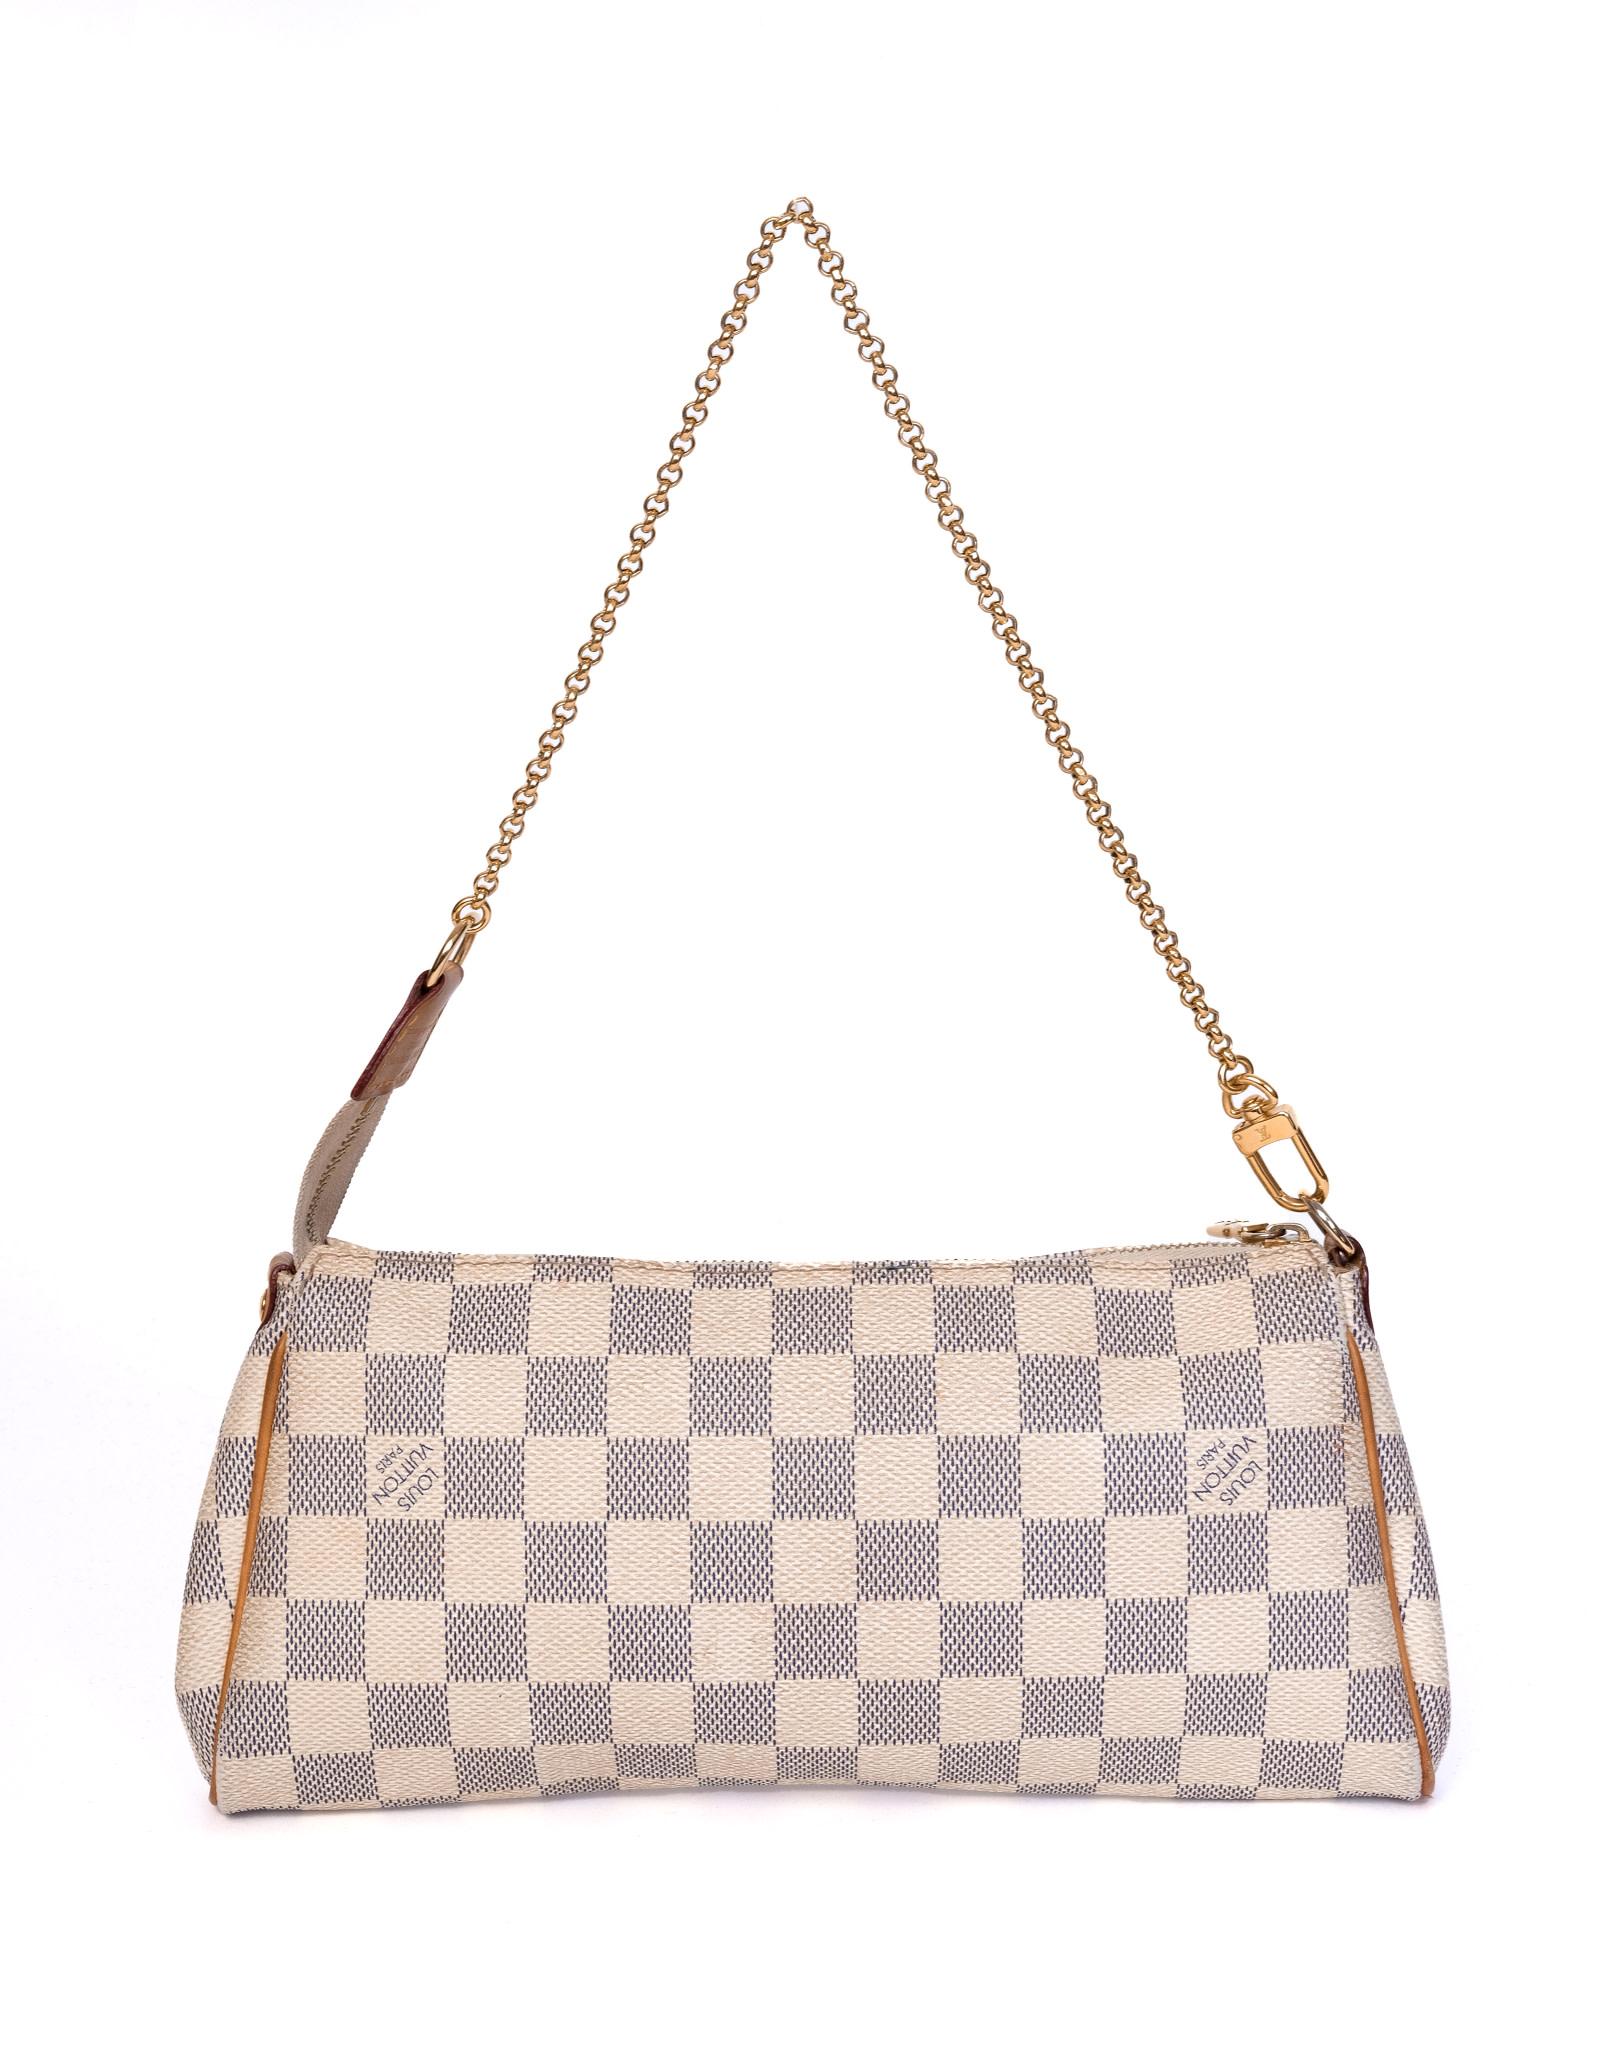 This bag is made with Damier Azur coated canvas and features tan natural leather trim, a chain strap, metal plate with logo, brass hardware, top zip closure, and a tan woven fabric interior. (Damier is French for checkerboard)

COLOR: White/Damier